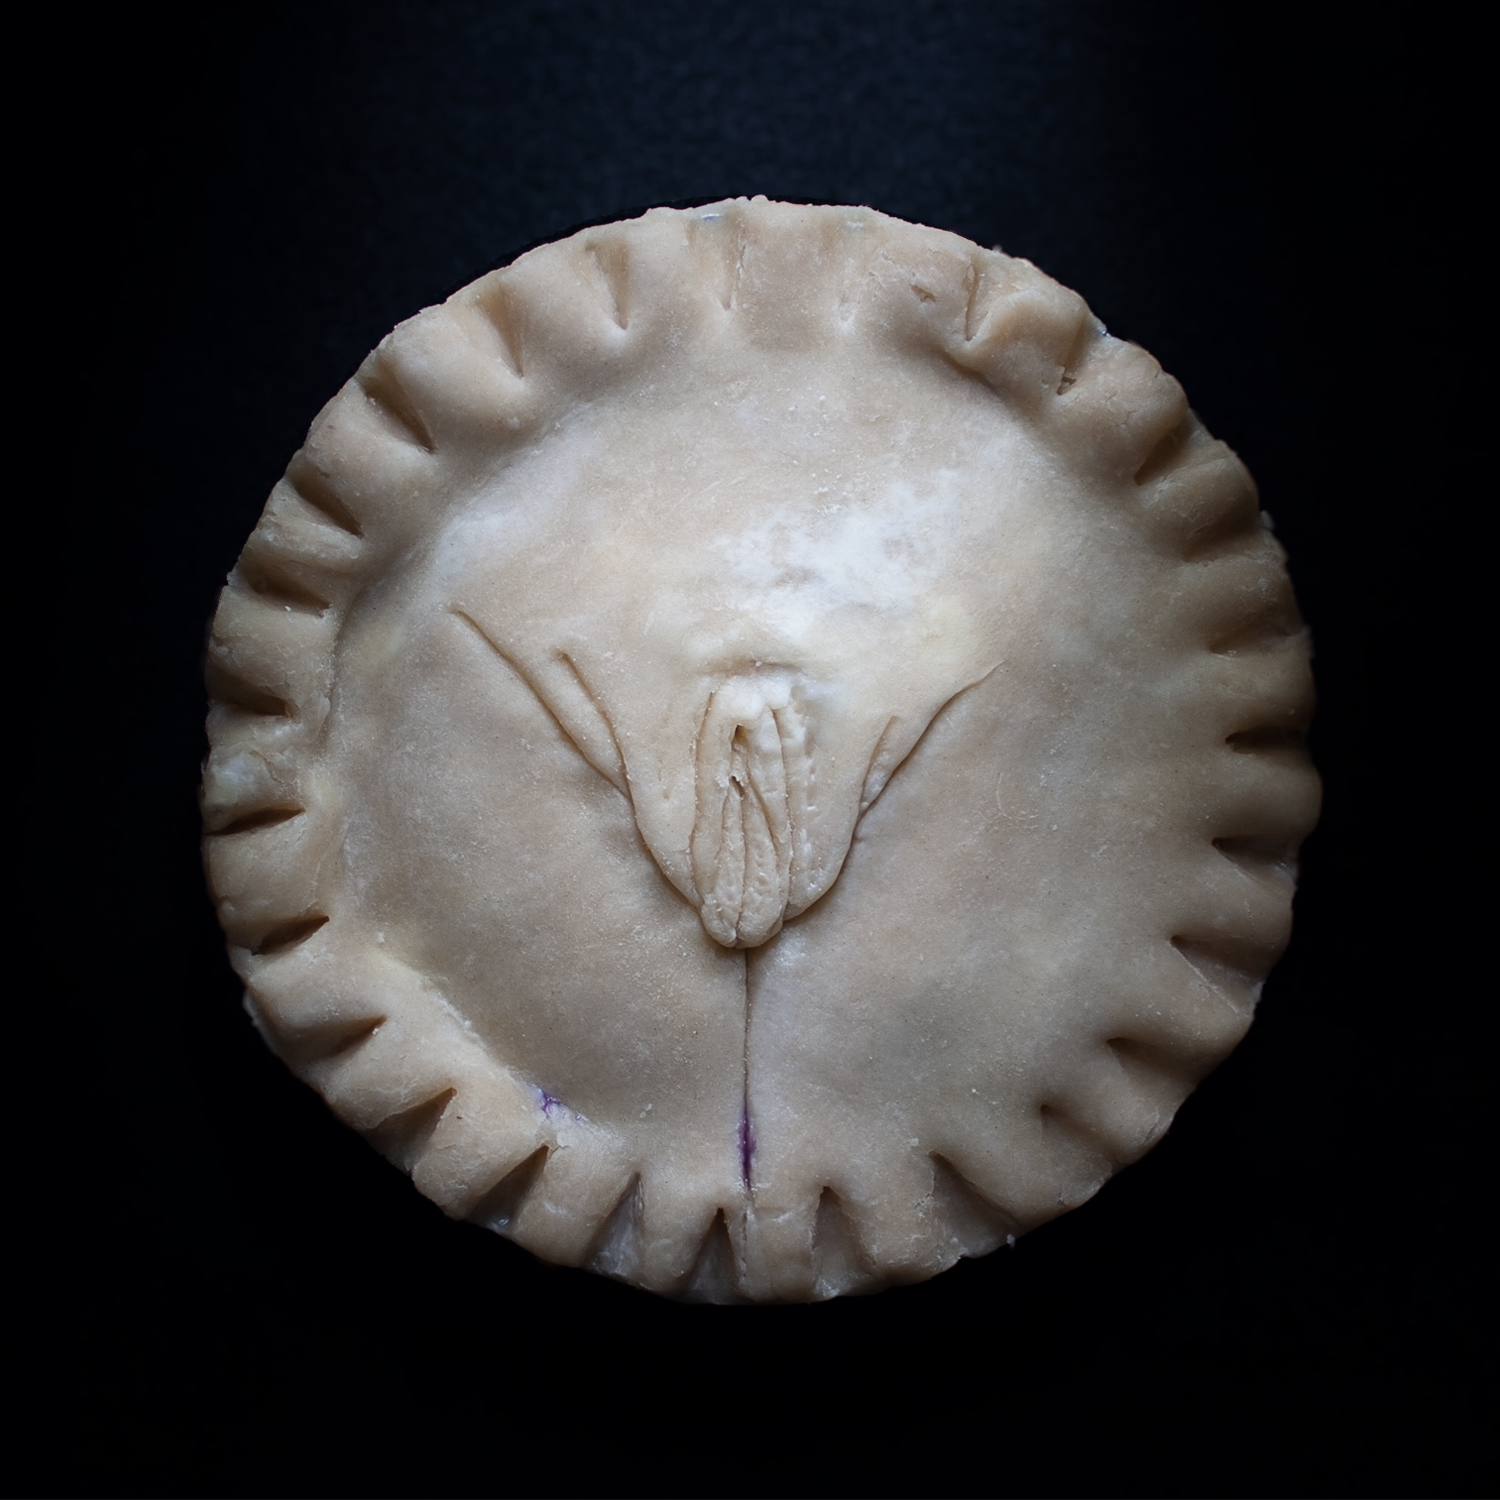 Pie 13, a pie sculpted to appear like a vulva